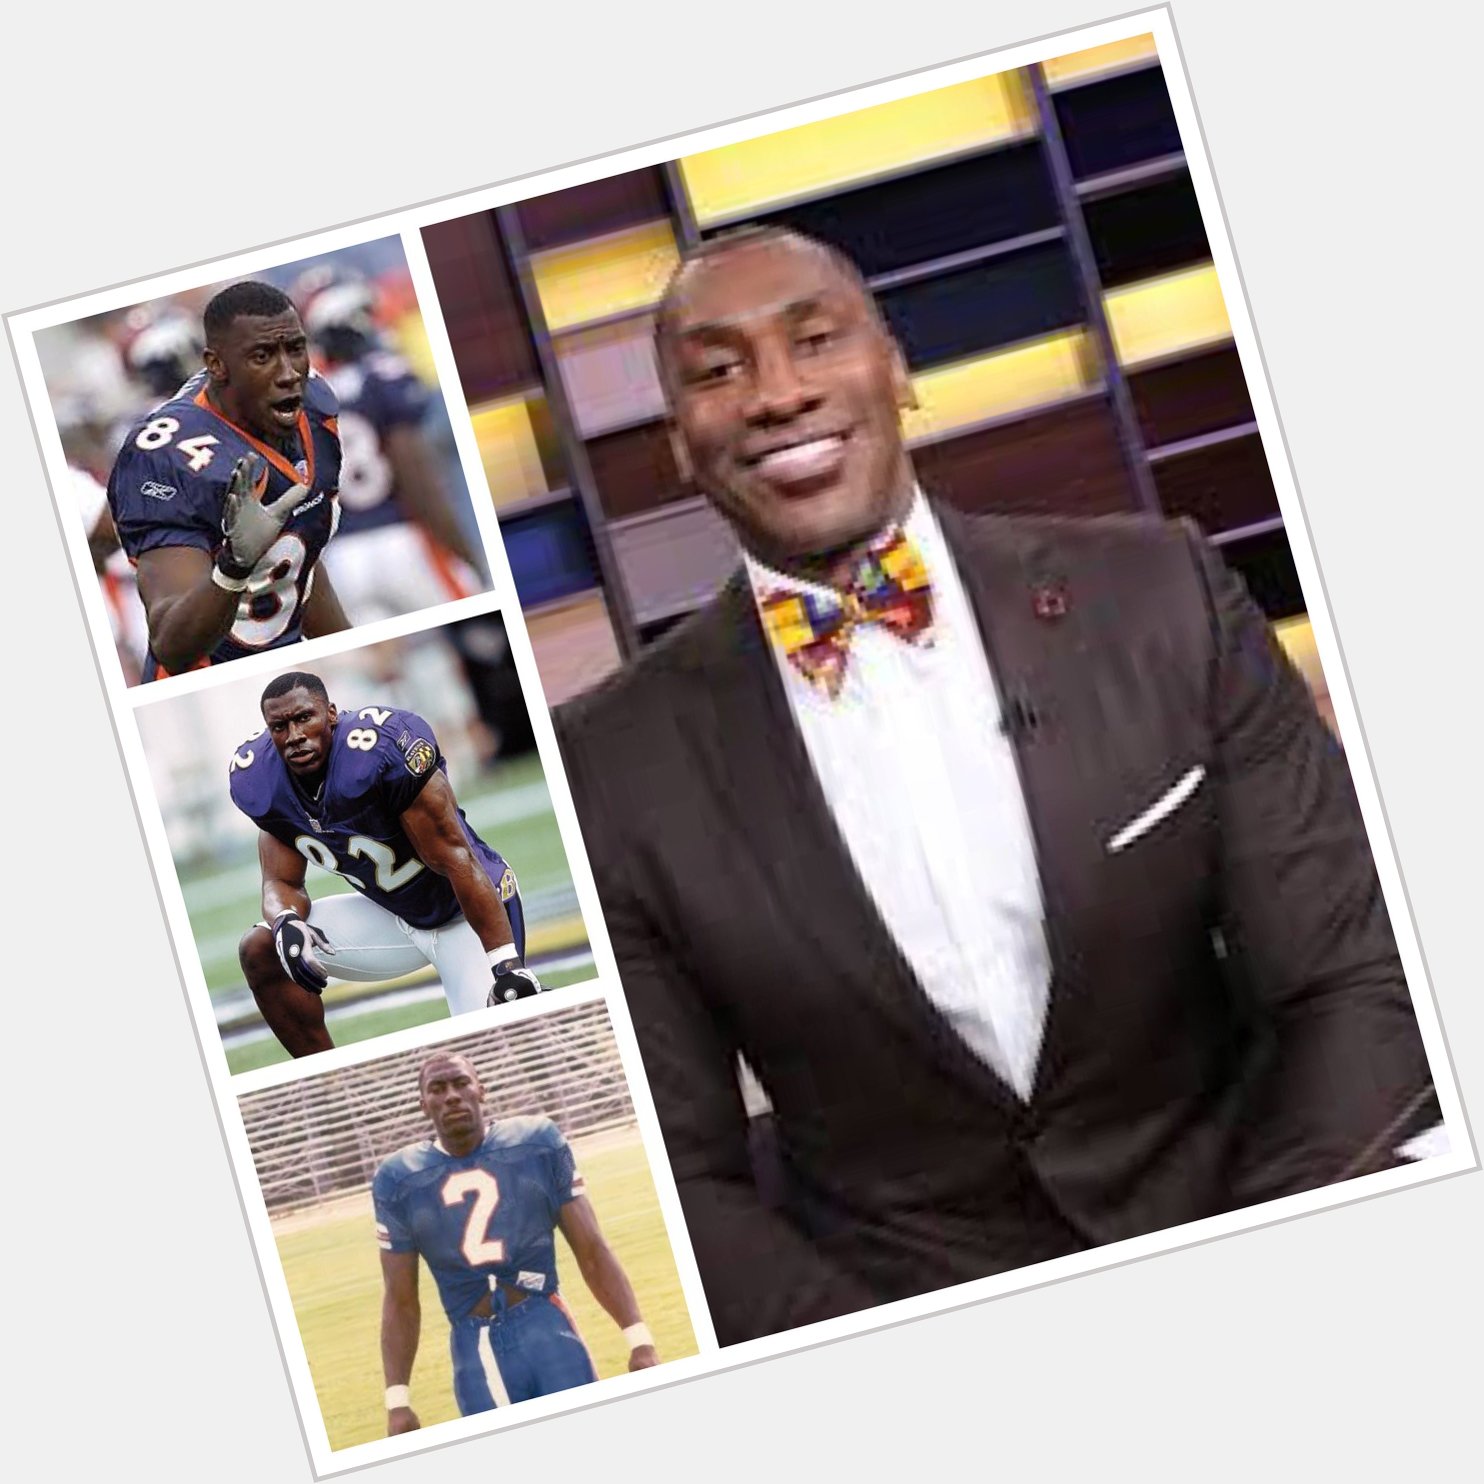 Happy BDay to the TE GOAT Big Play Shannon Sharpe on Yack & Mild 